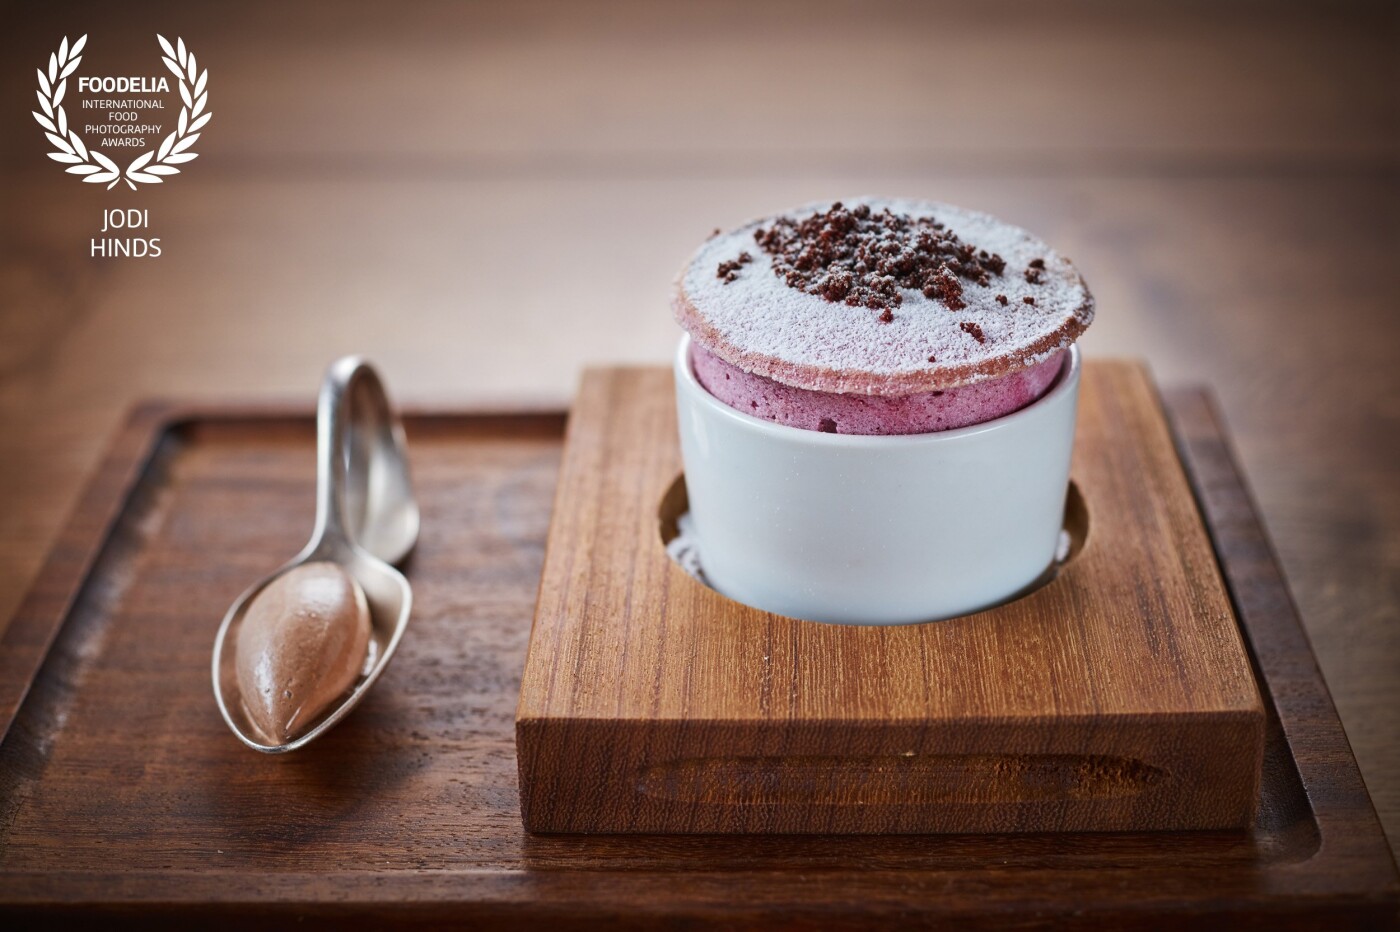 The most incredible cherry soufflé from the talented kitchen @simpsons_restaurant<br />
Chefs: @luke.tipping @chunk86 @franbrella<br />
Restaurant: @simpsons_restaurant<br />
Photographer: @jodihindsphoto